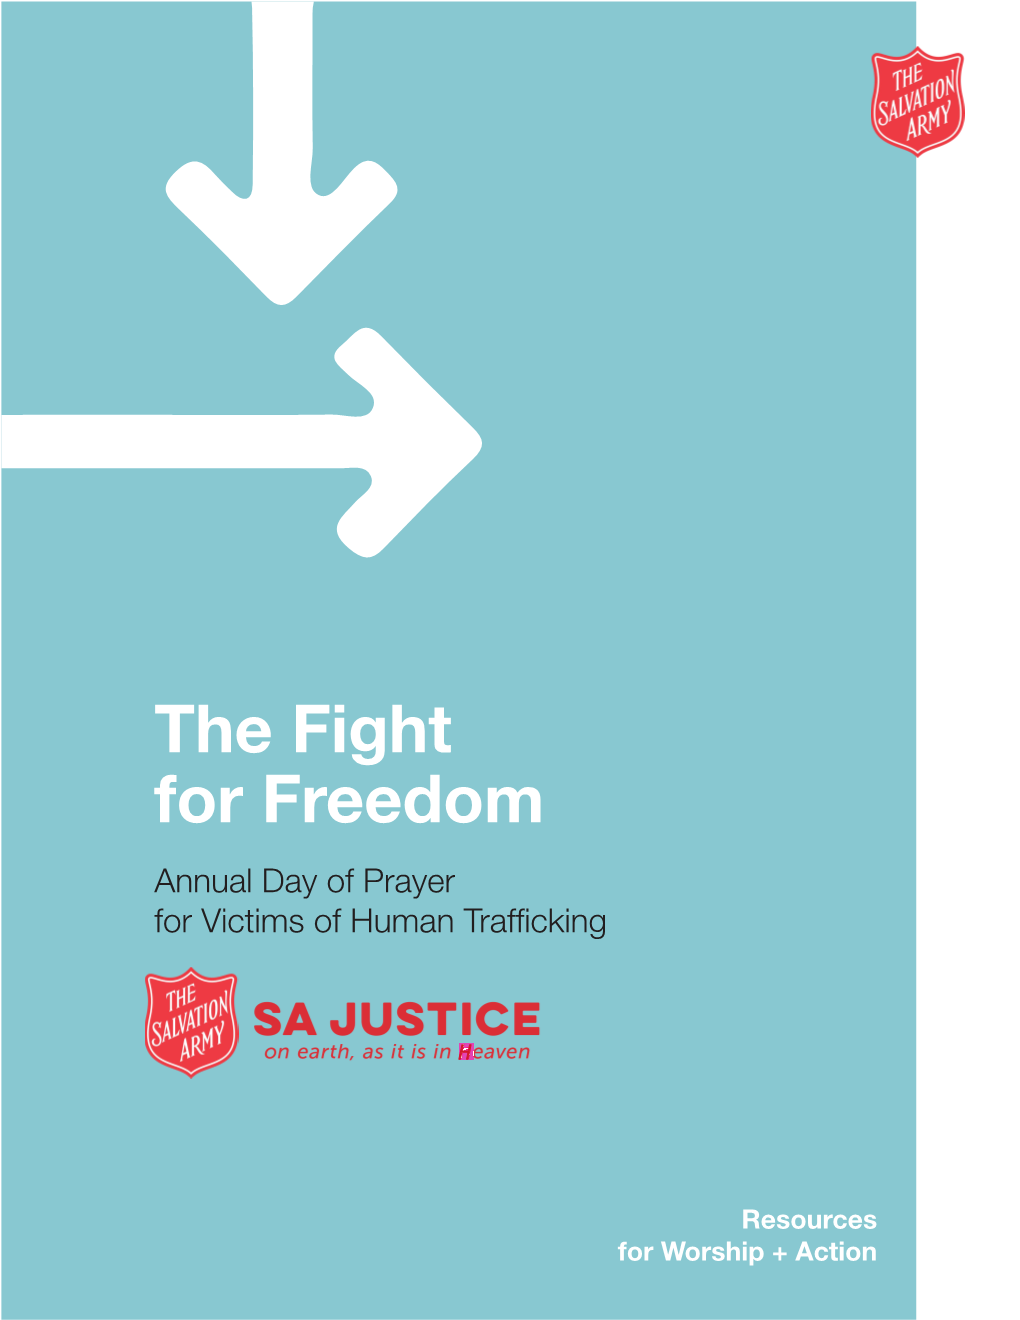 The Fight for Freedom Annual Day of Prayer for Victims of Human Trafficking